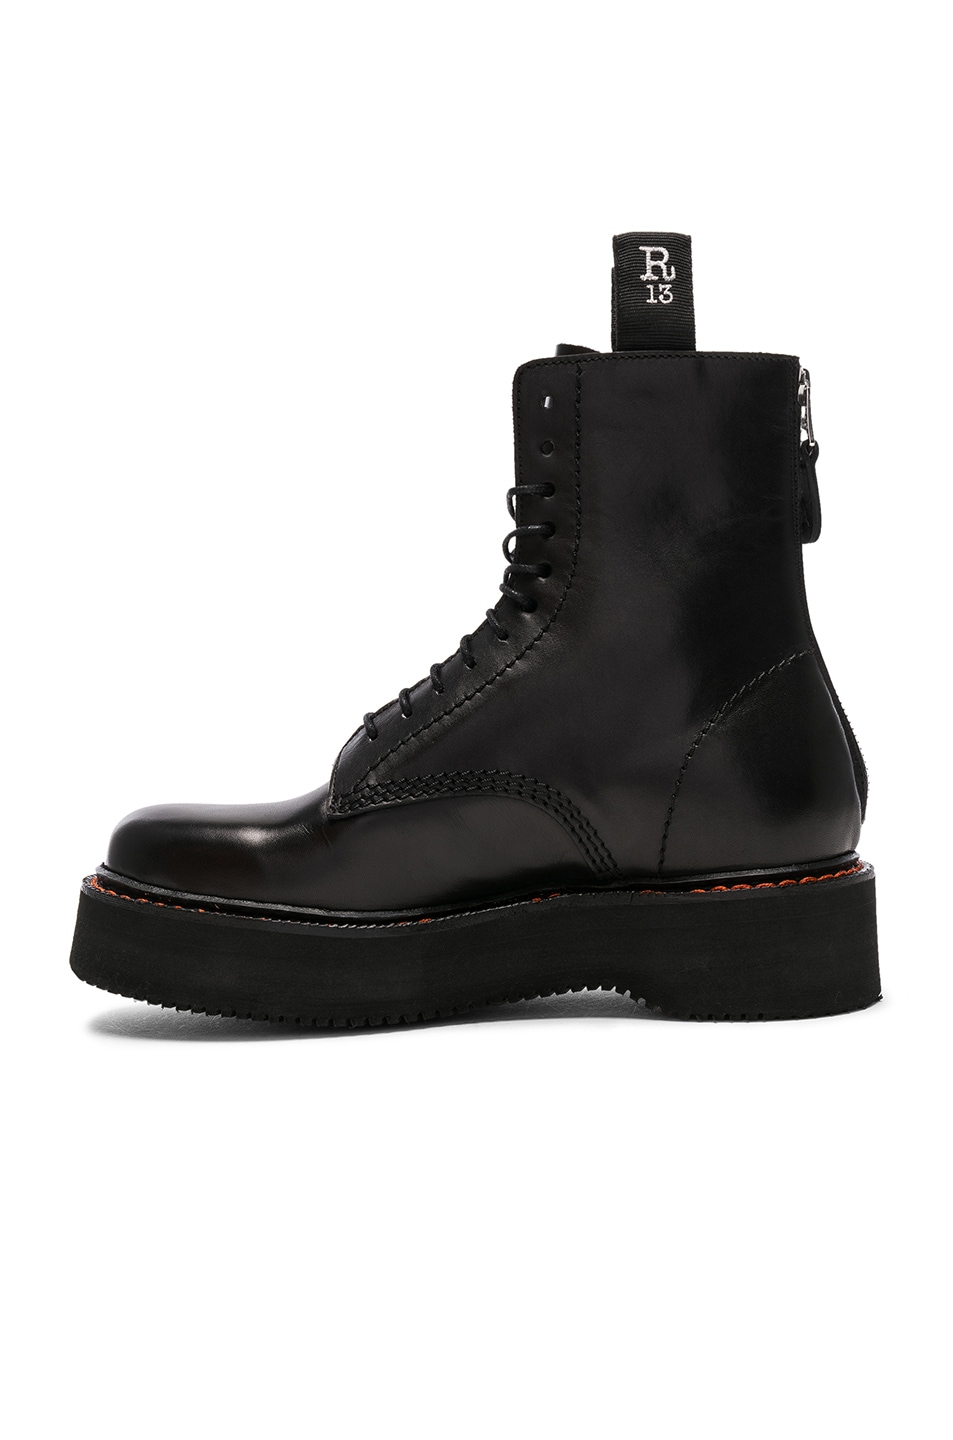 R13 Leather Boots in Black | FWRD